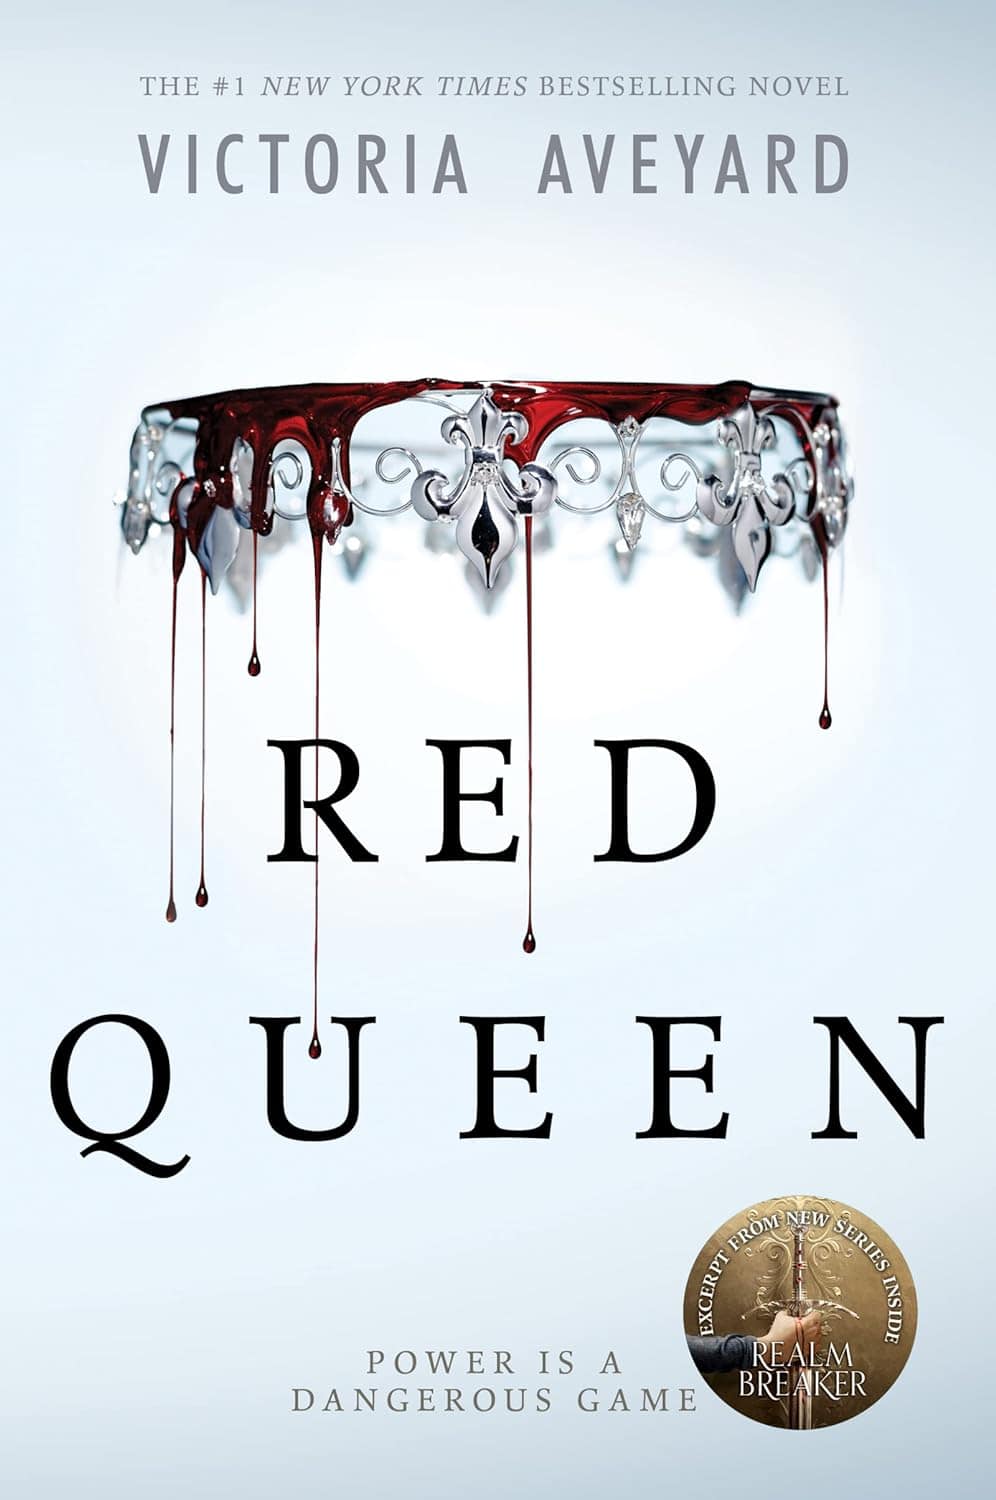 "Red Queen" by Victoria Aveyard